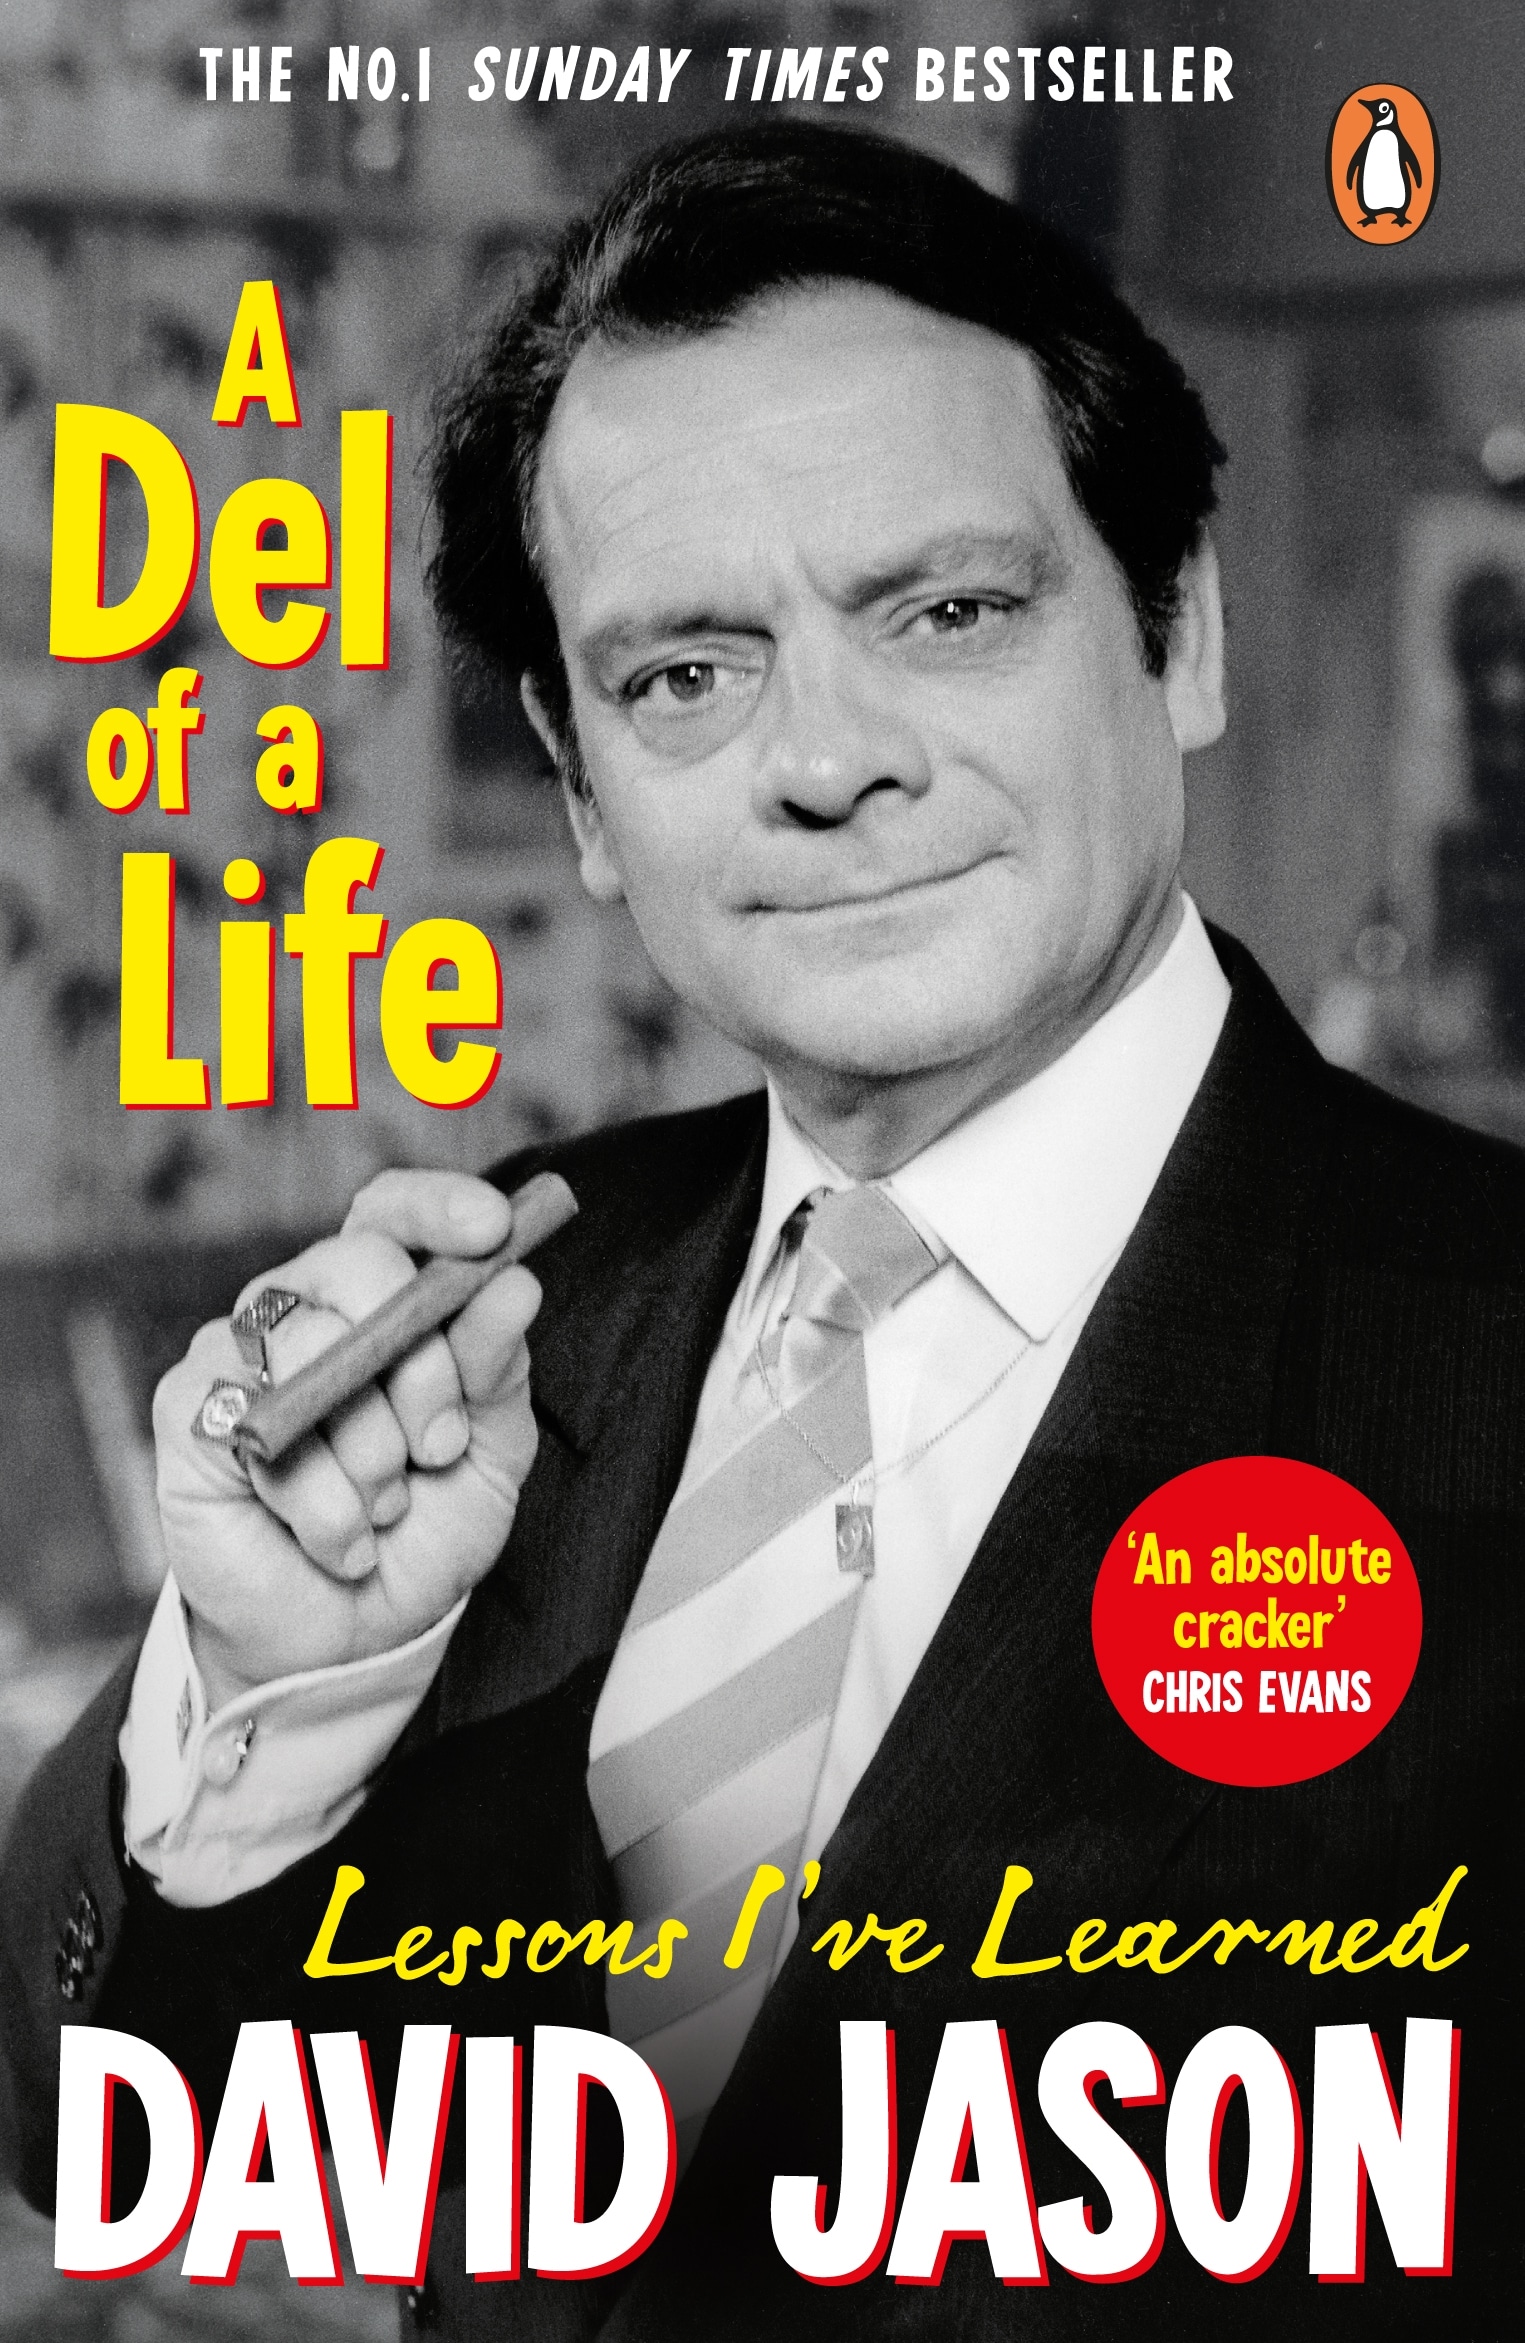 Book “A Del of a Life” by David Jason — September 16, 2021